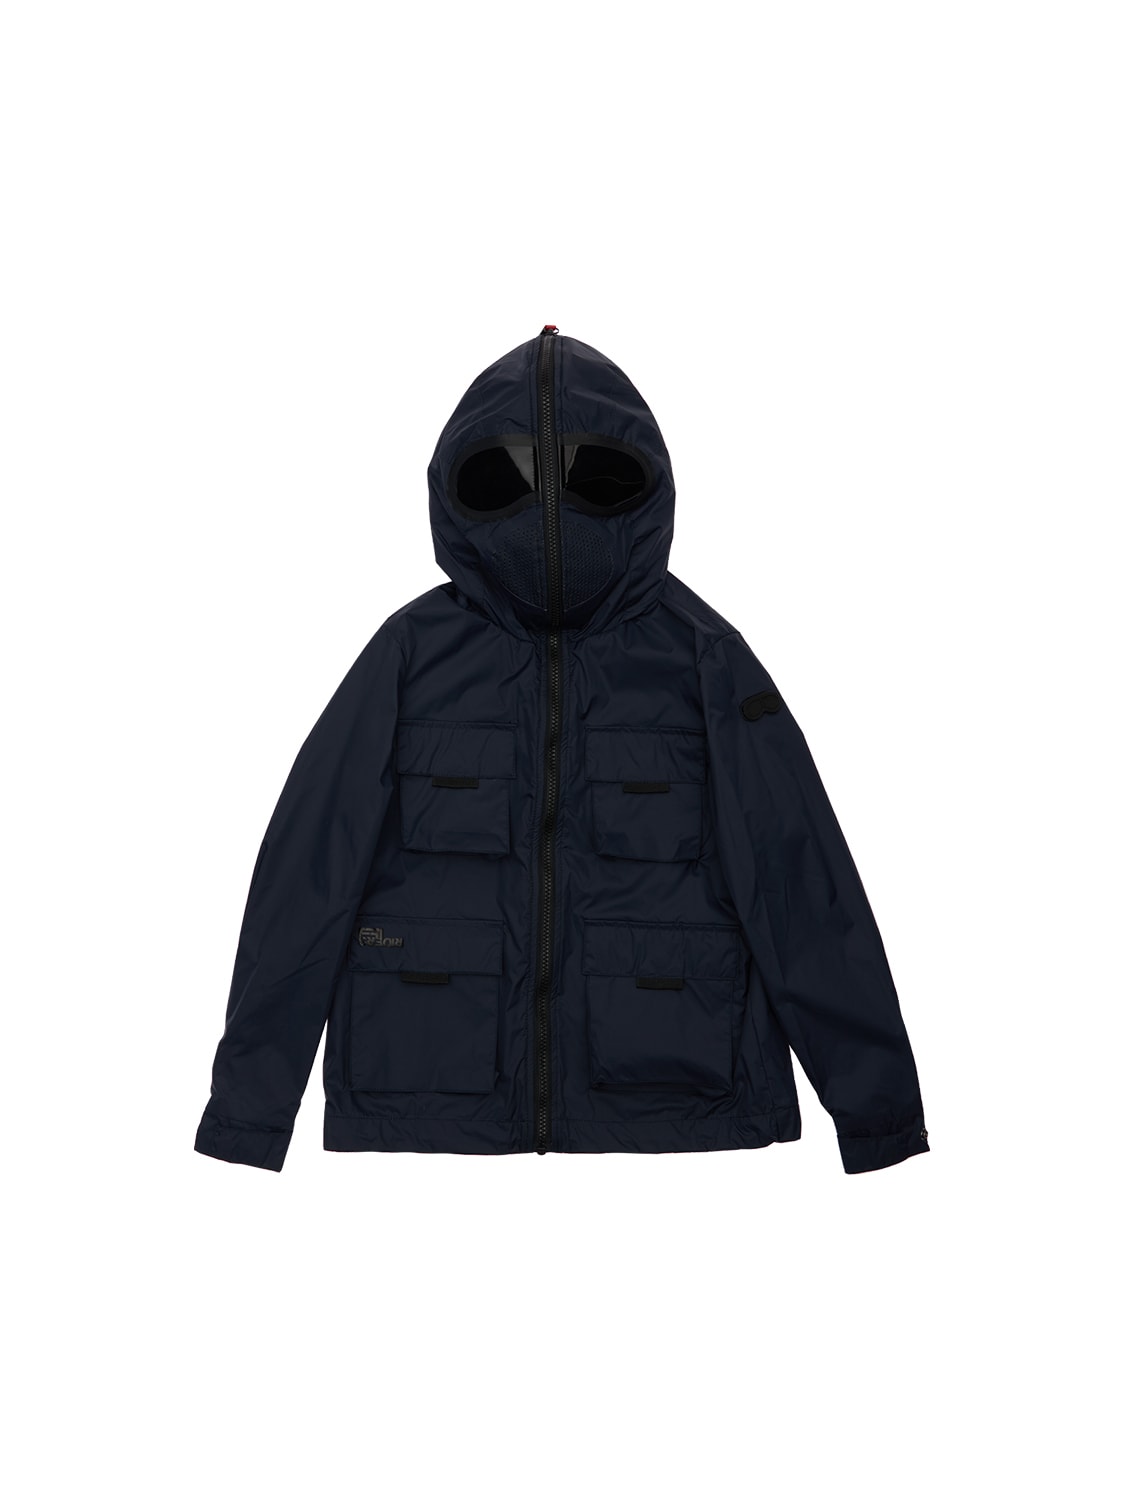 Ai Riders On The Storm Kids' Hooded Nylon Coat W/ Lenses In Navy